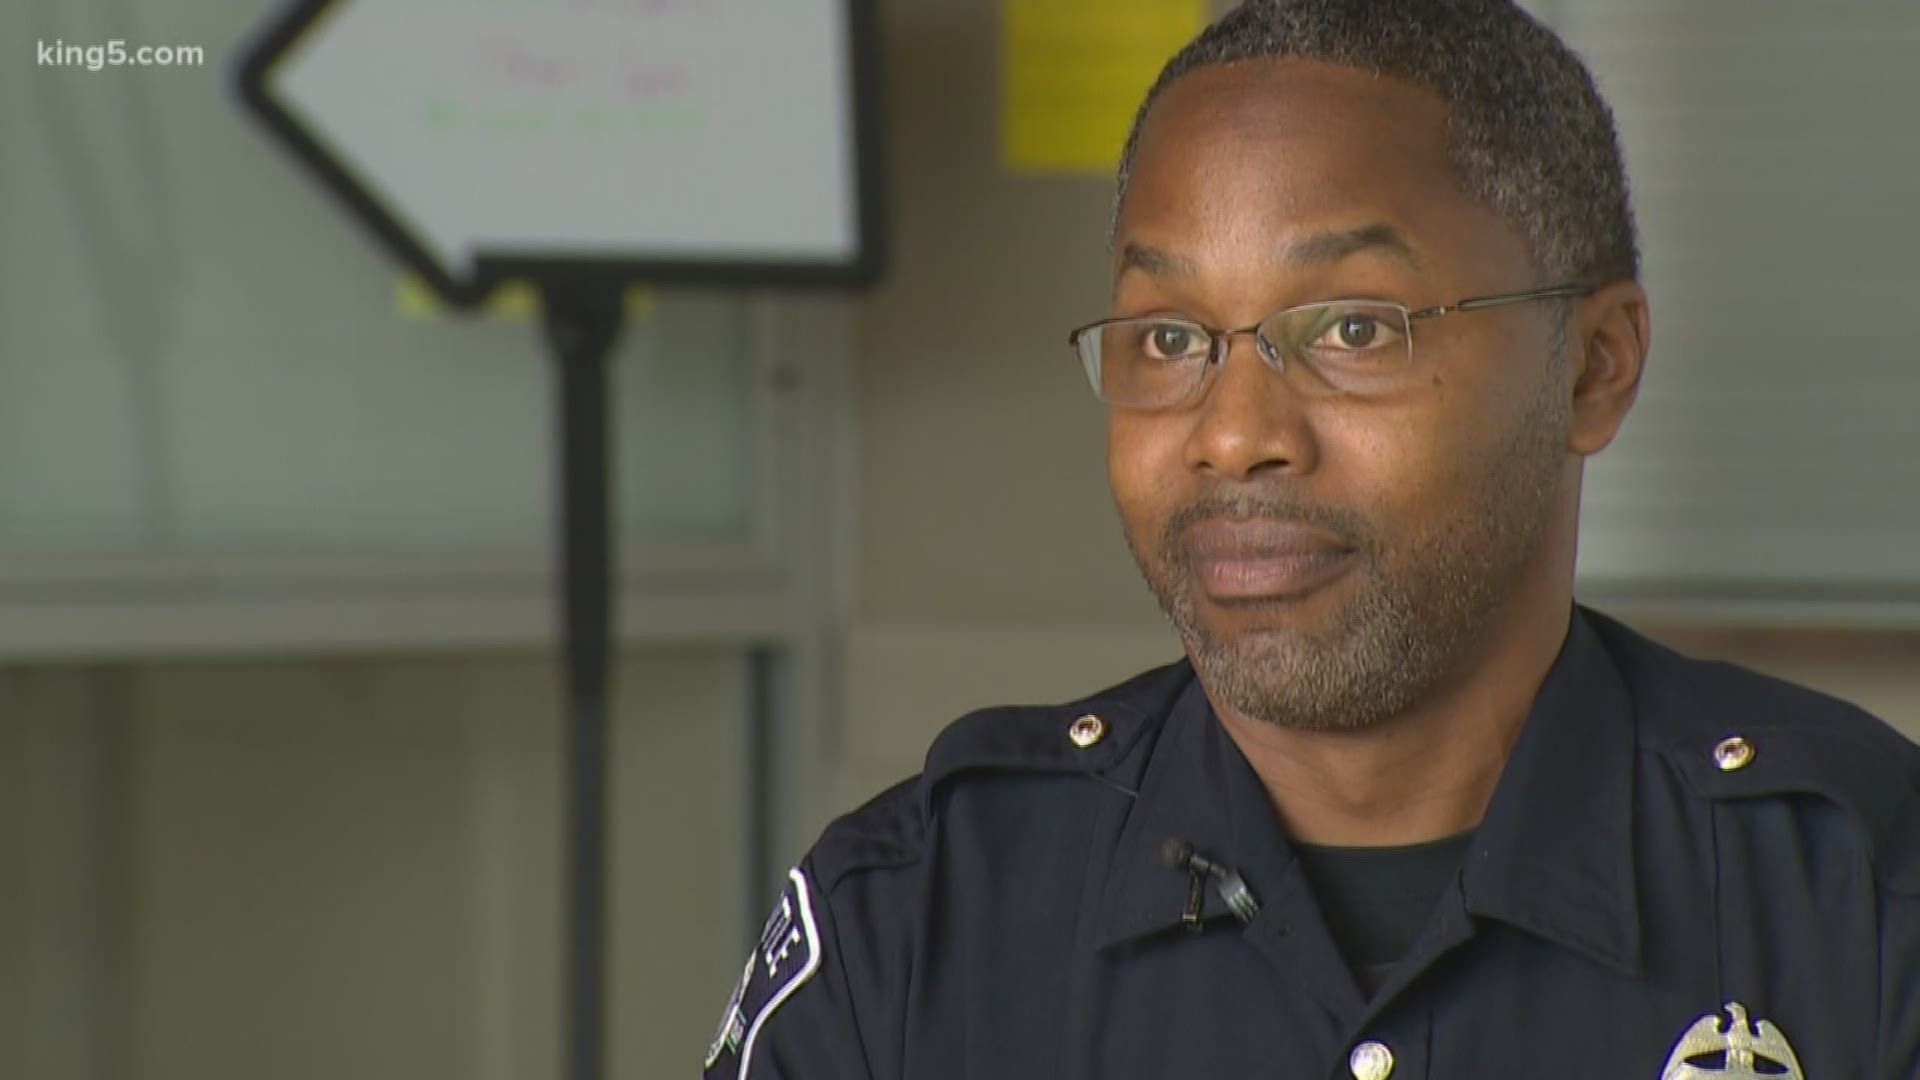 A Seattle Police officer is using his skills as a barber to help foster community and conversation in Seattle.